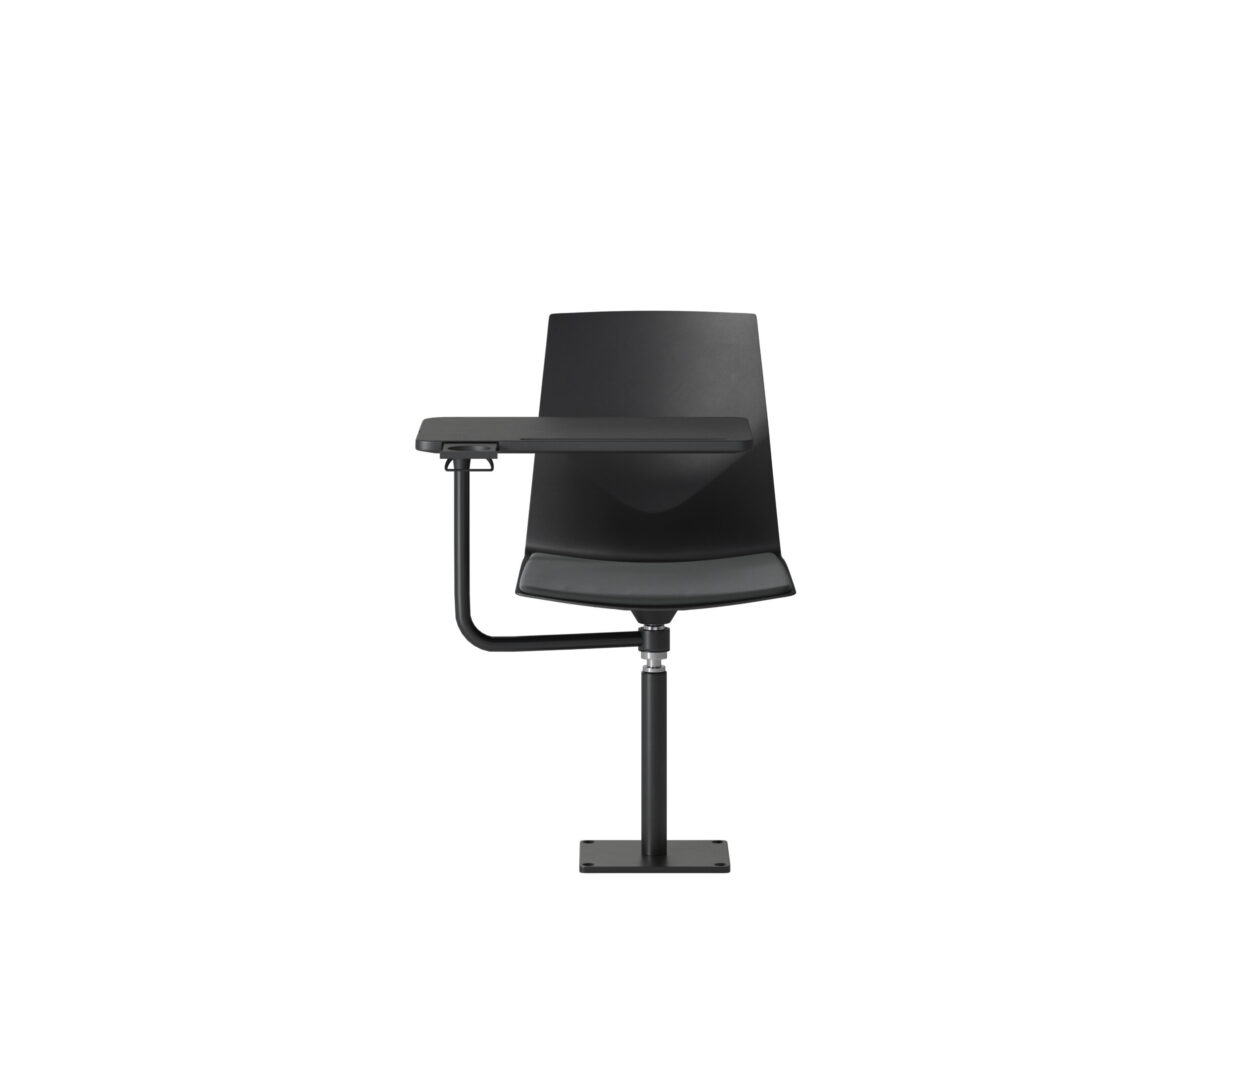 OCEE&FOUR - Chairs - FourCast2 Audi - Plastic shell - Seat Pad - Innotab - Swivel Frame - Packshot Image 5